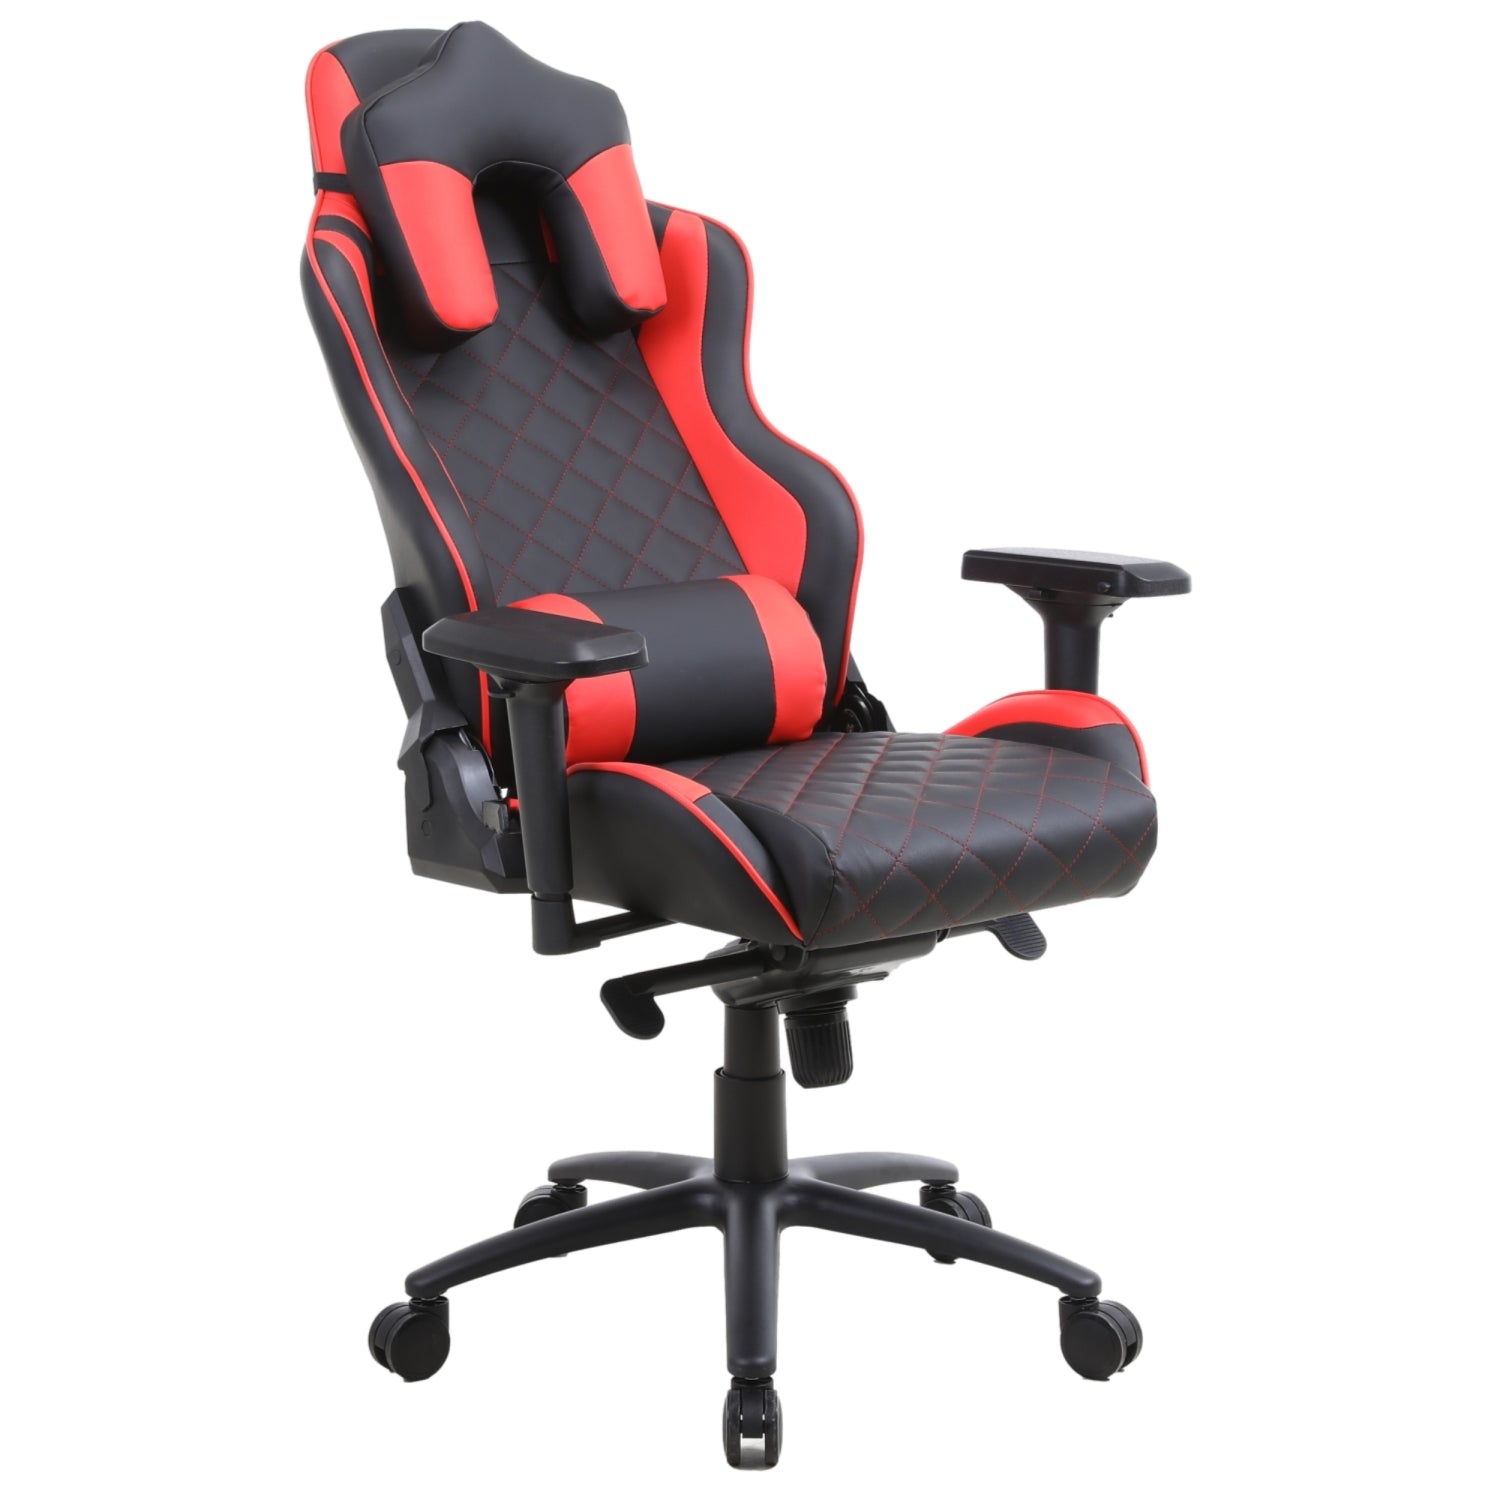 ViscoLogic VANGUARD Premium Grade Series Ergonomic Quilted PU Leather Upholstery Home Office Computer Desk Gaming Chair (Black & Red)